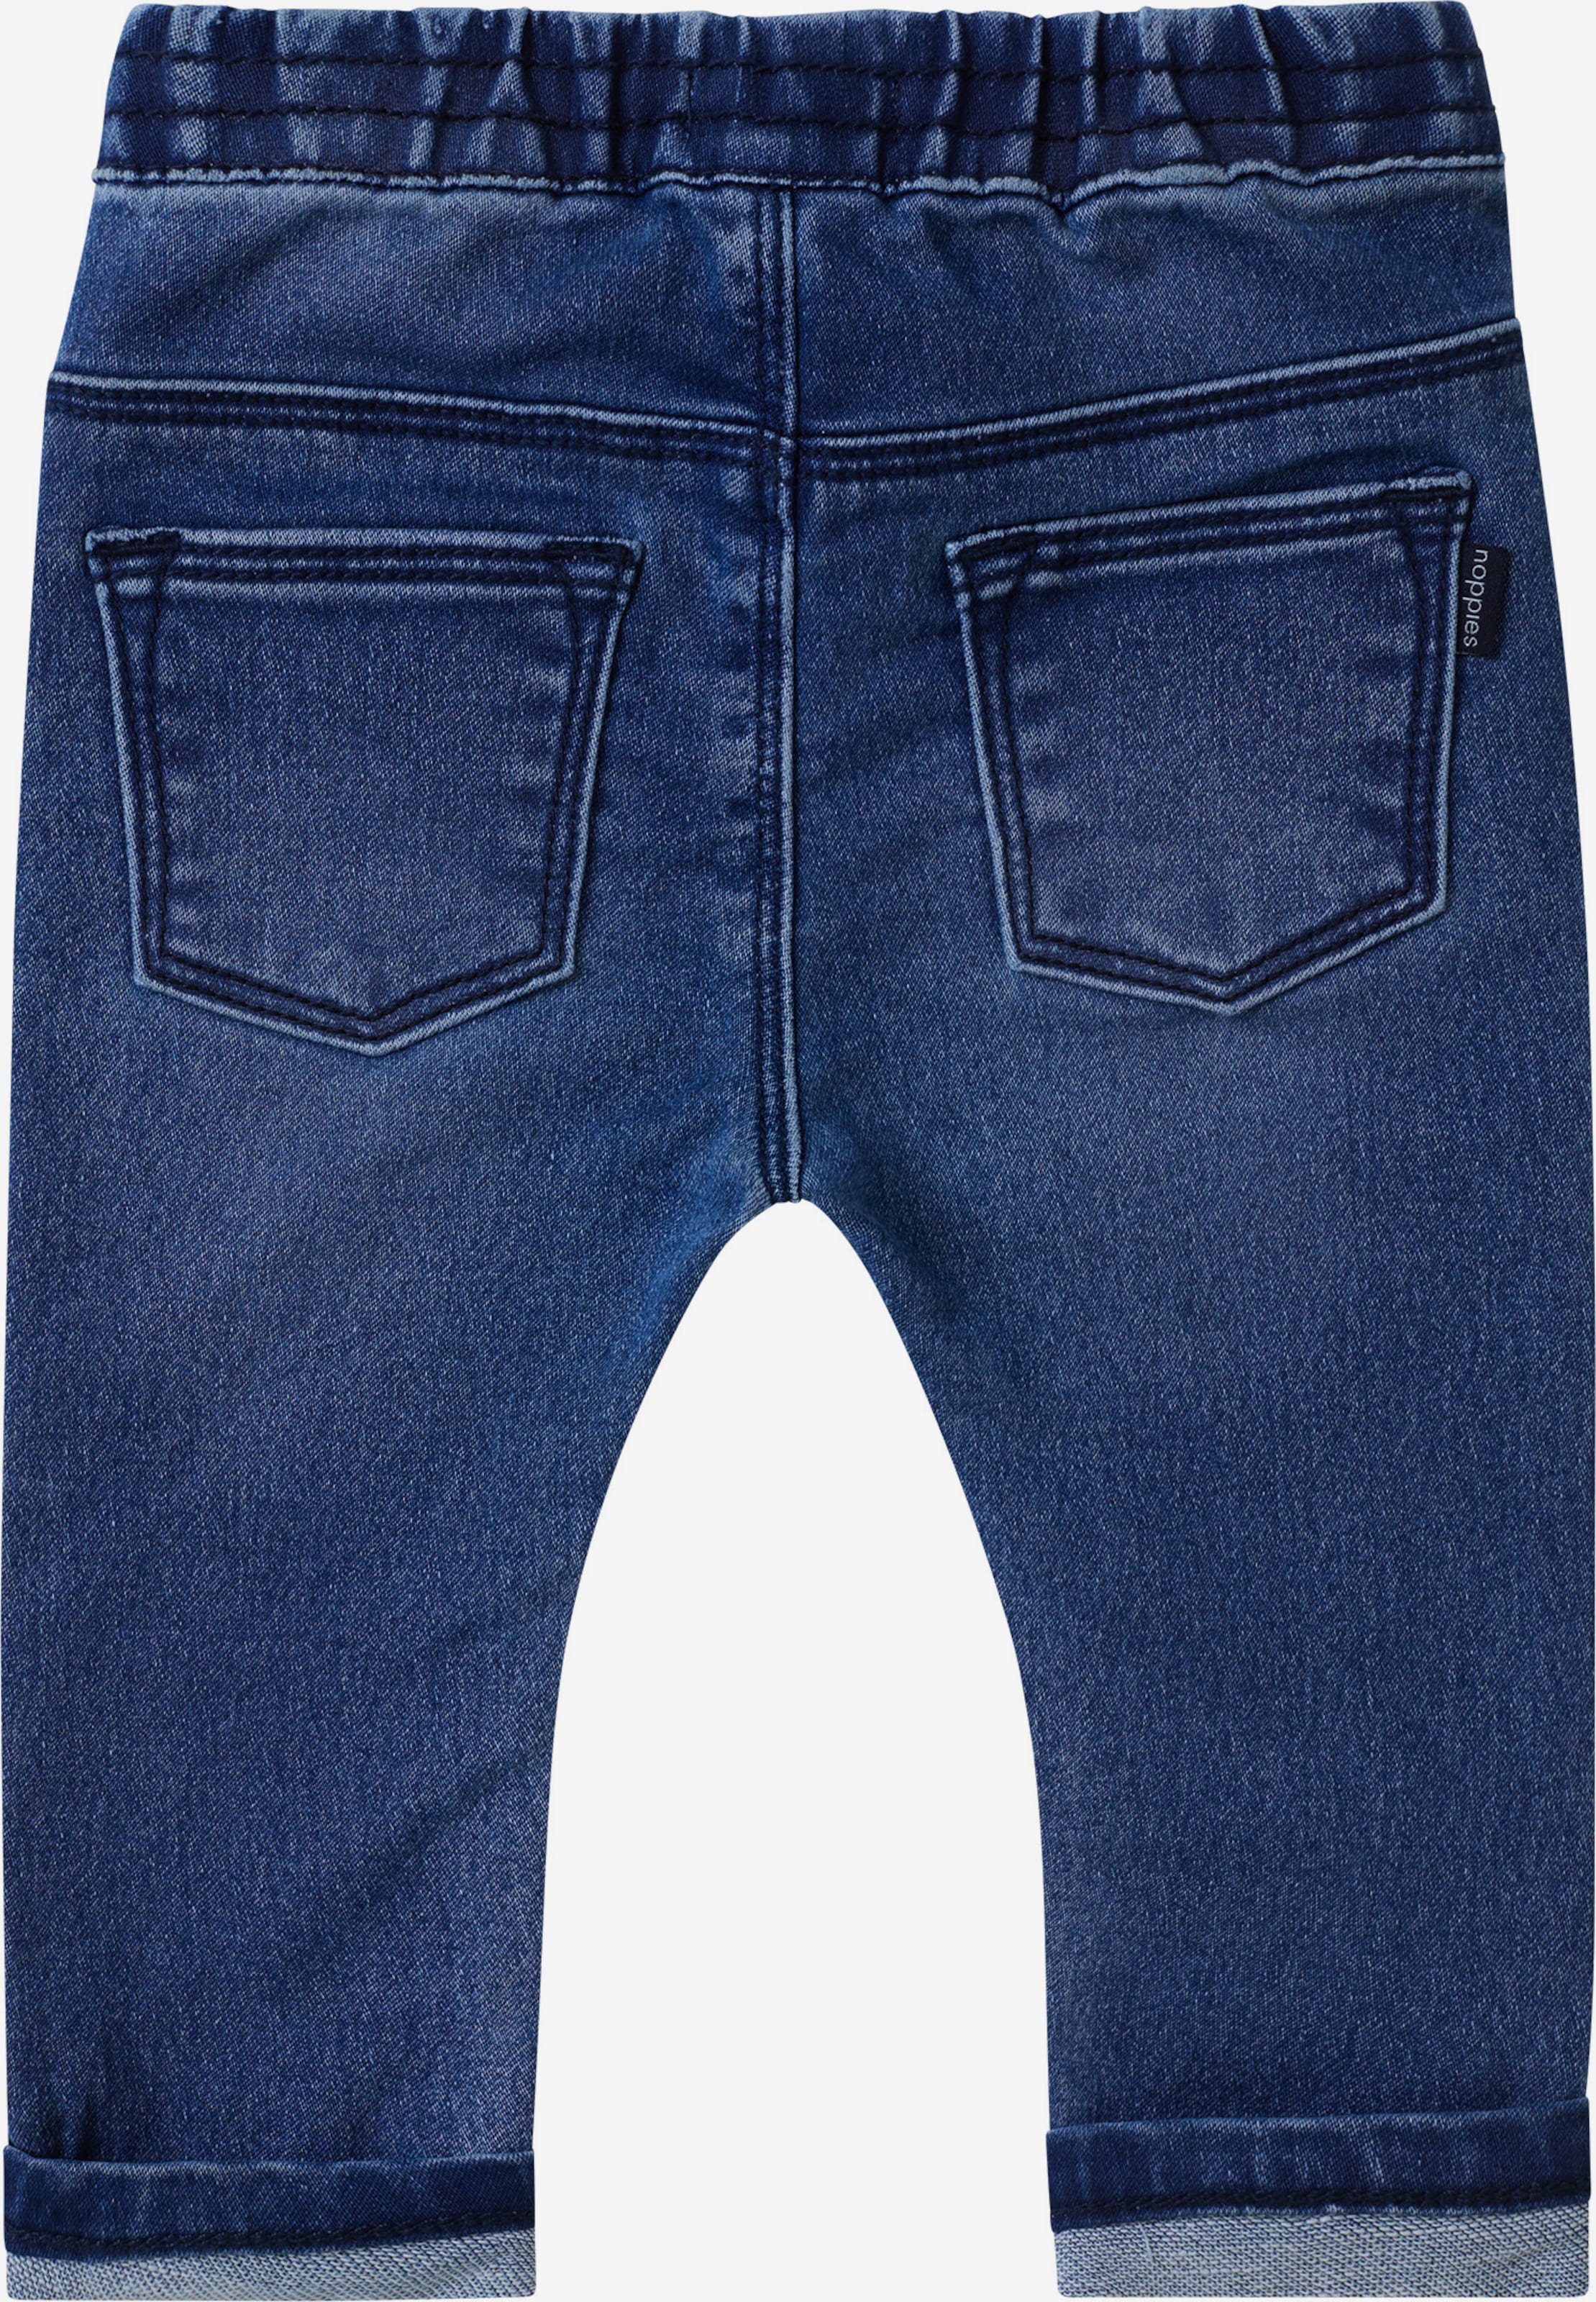 Regular Jeans 'Tappan' in | ABOUT YOU